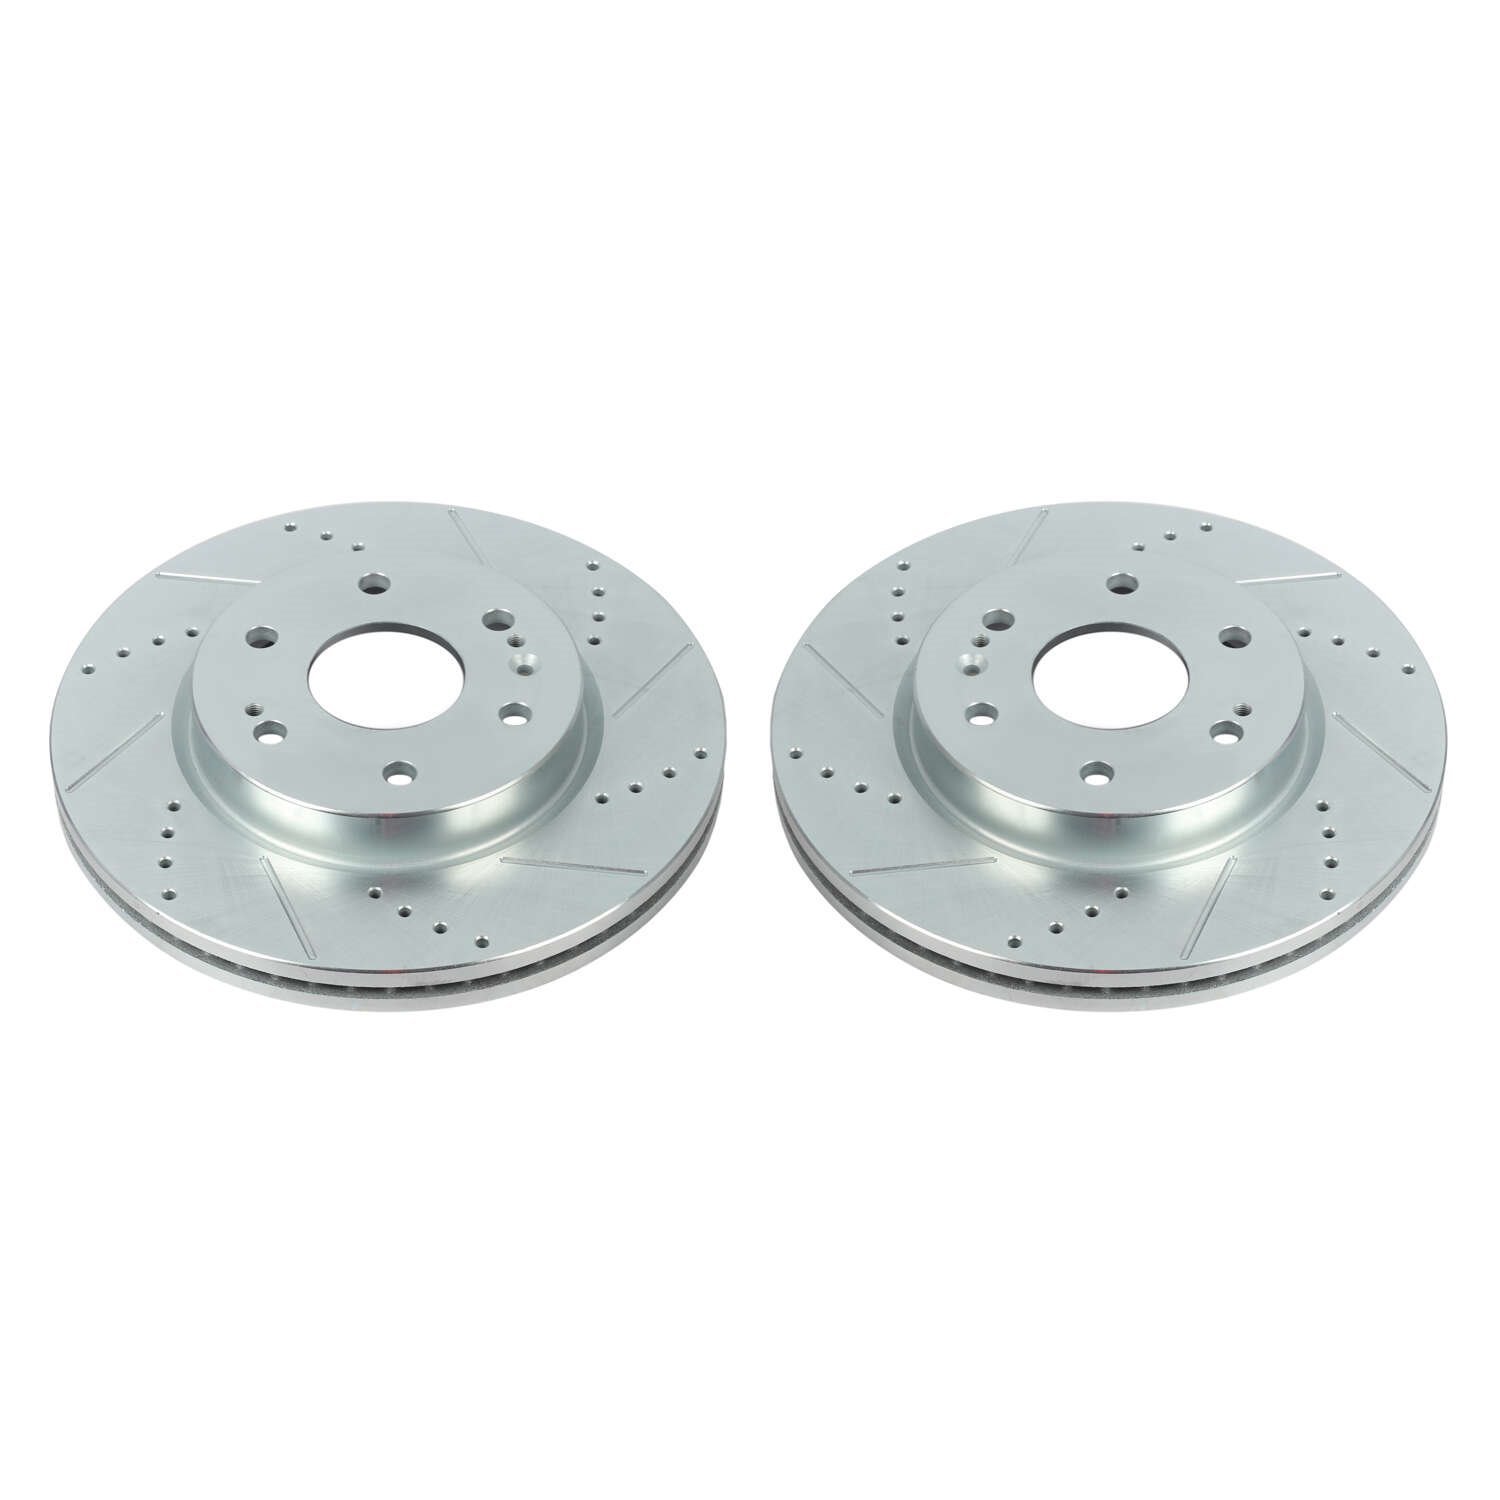 Extreme Performance Drilled And Slotted Front Brake Rotors Fits Select Late Model Cadillac, Chevrolet, GMC Models